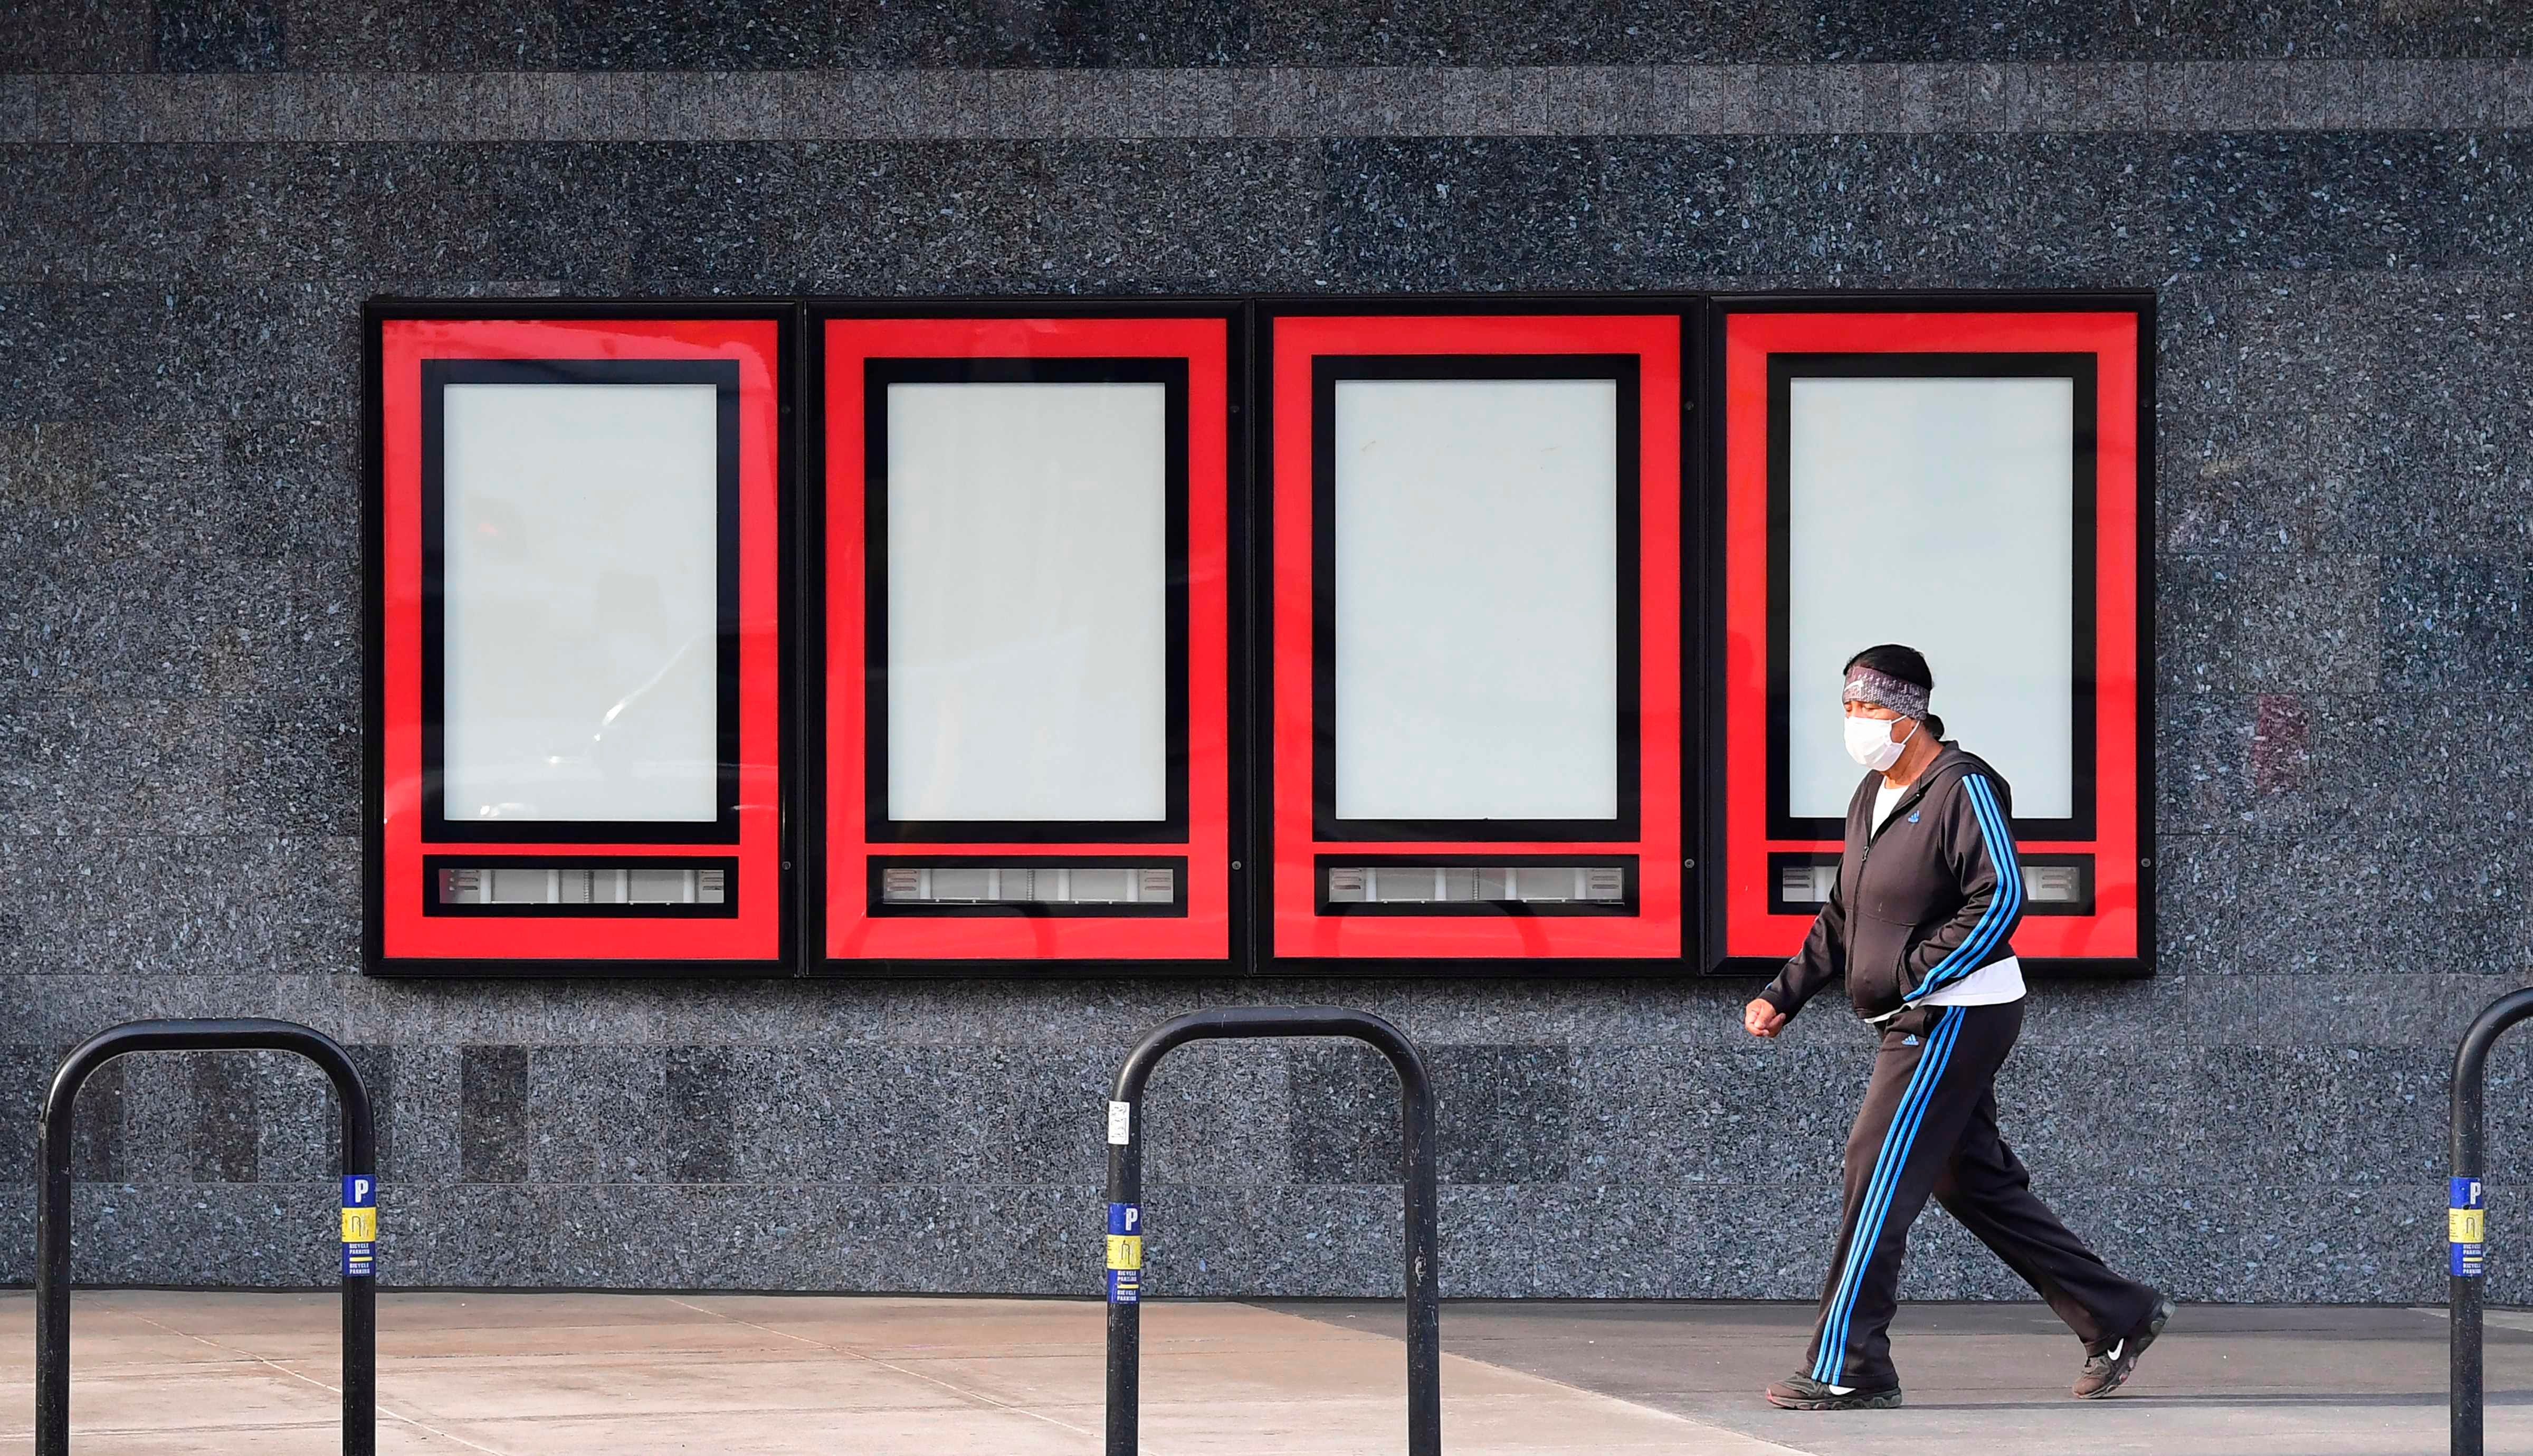 A pedestrian in a facemask walks past empty cases where upcoming movies were once displayed at Regal Cinemas on Oct. 5, 2020 in Los Angeles. The second-largest operator of theaters in the U.S., Regal plans to close 500 theaters, affecting some 40,000 employees, due to the coronavirus pandemic.